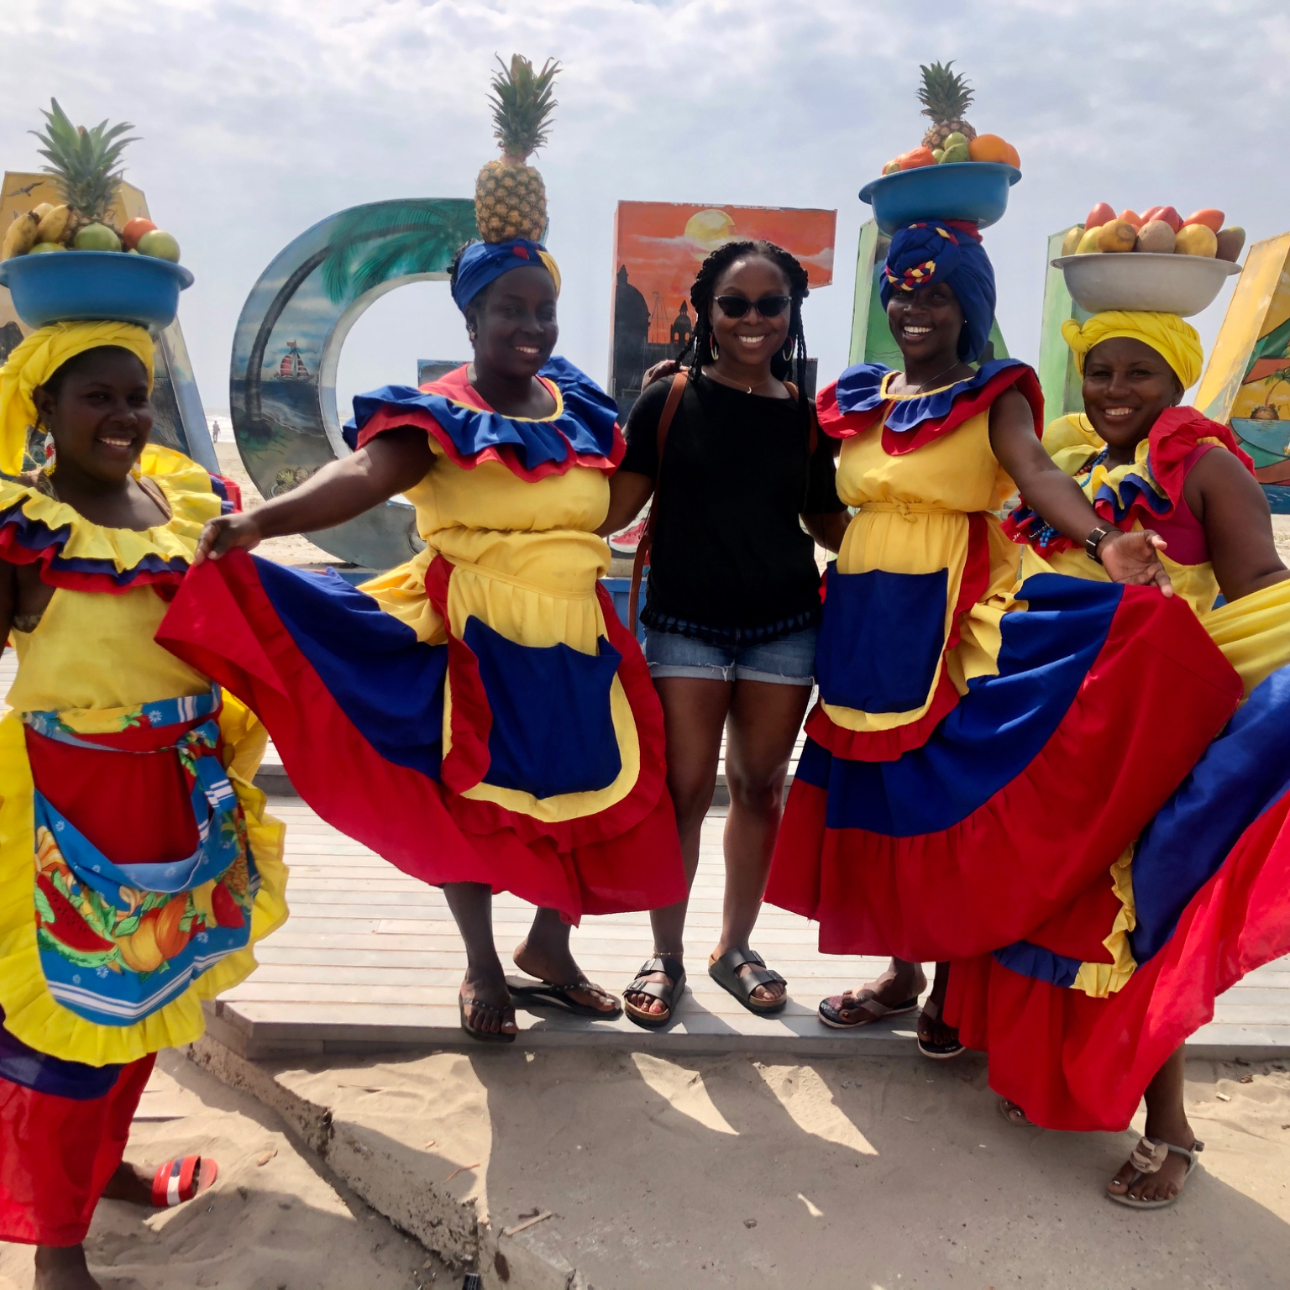 Taking a pic with Palenqueras in Colombia